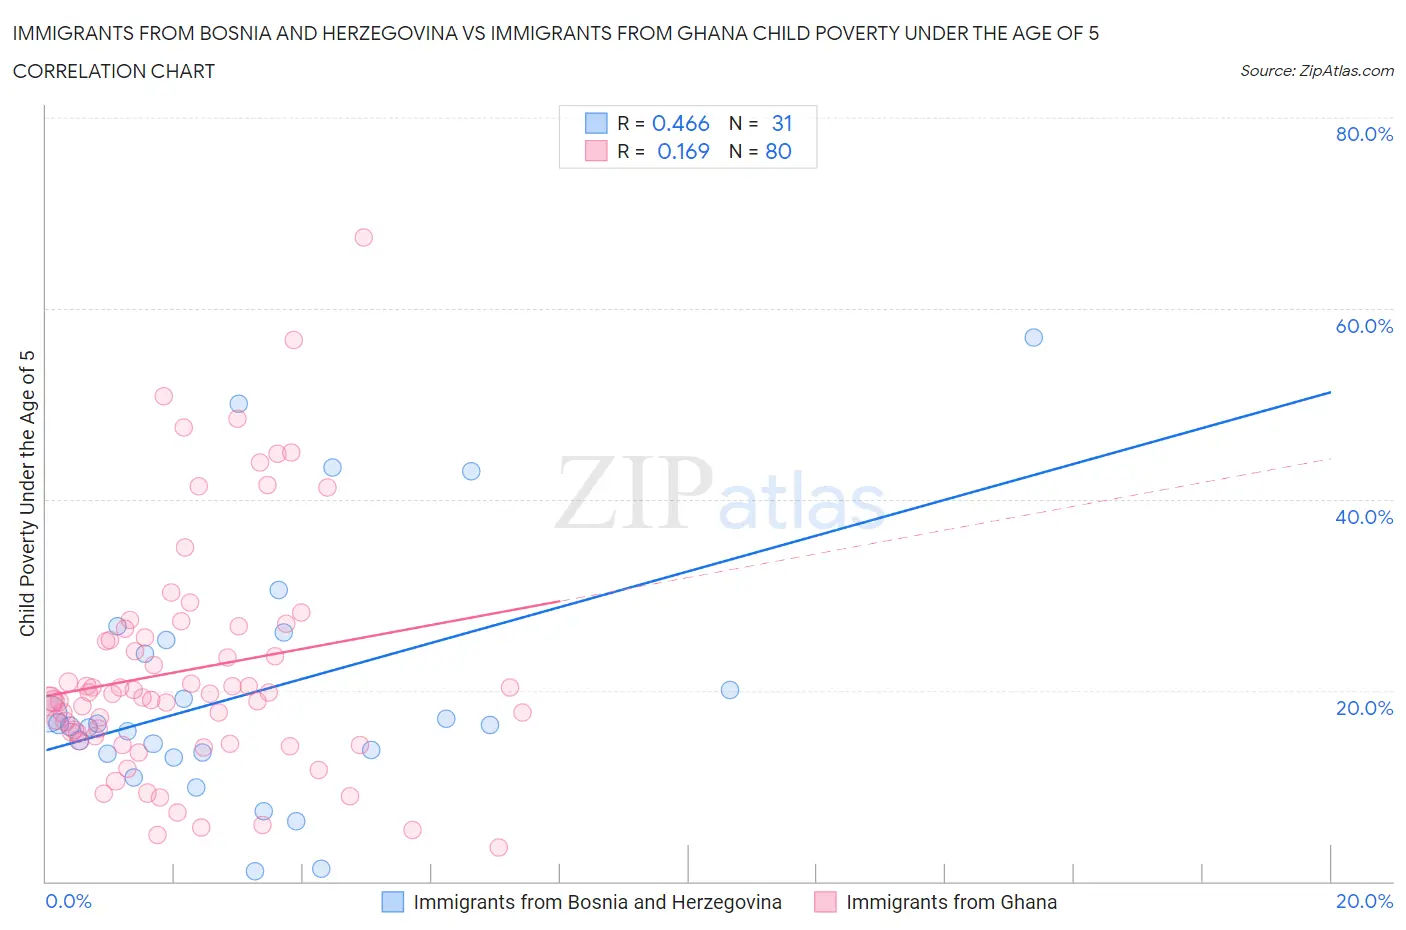 Immigrants from Bosnia and Herzegovina vs Immigrants from Ghana Child Poverty Under the Age of 5